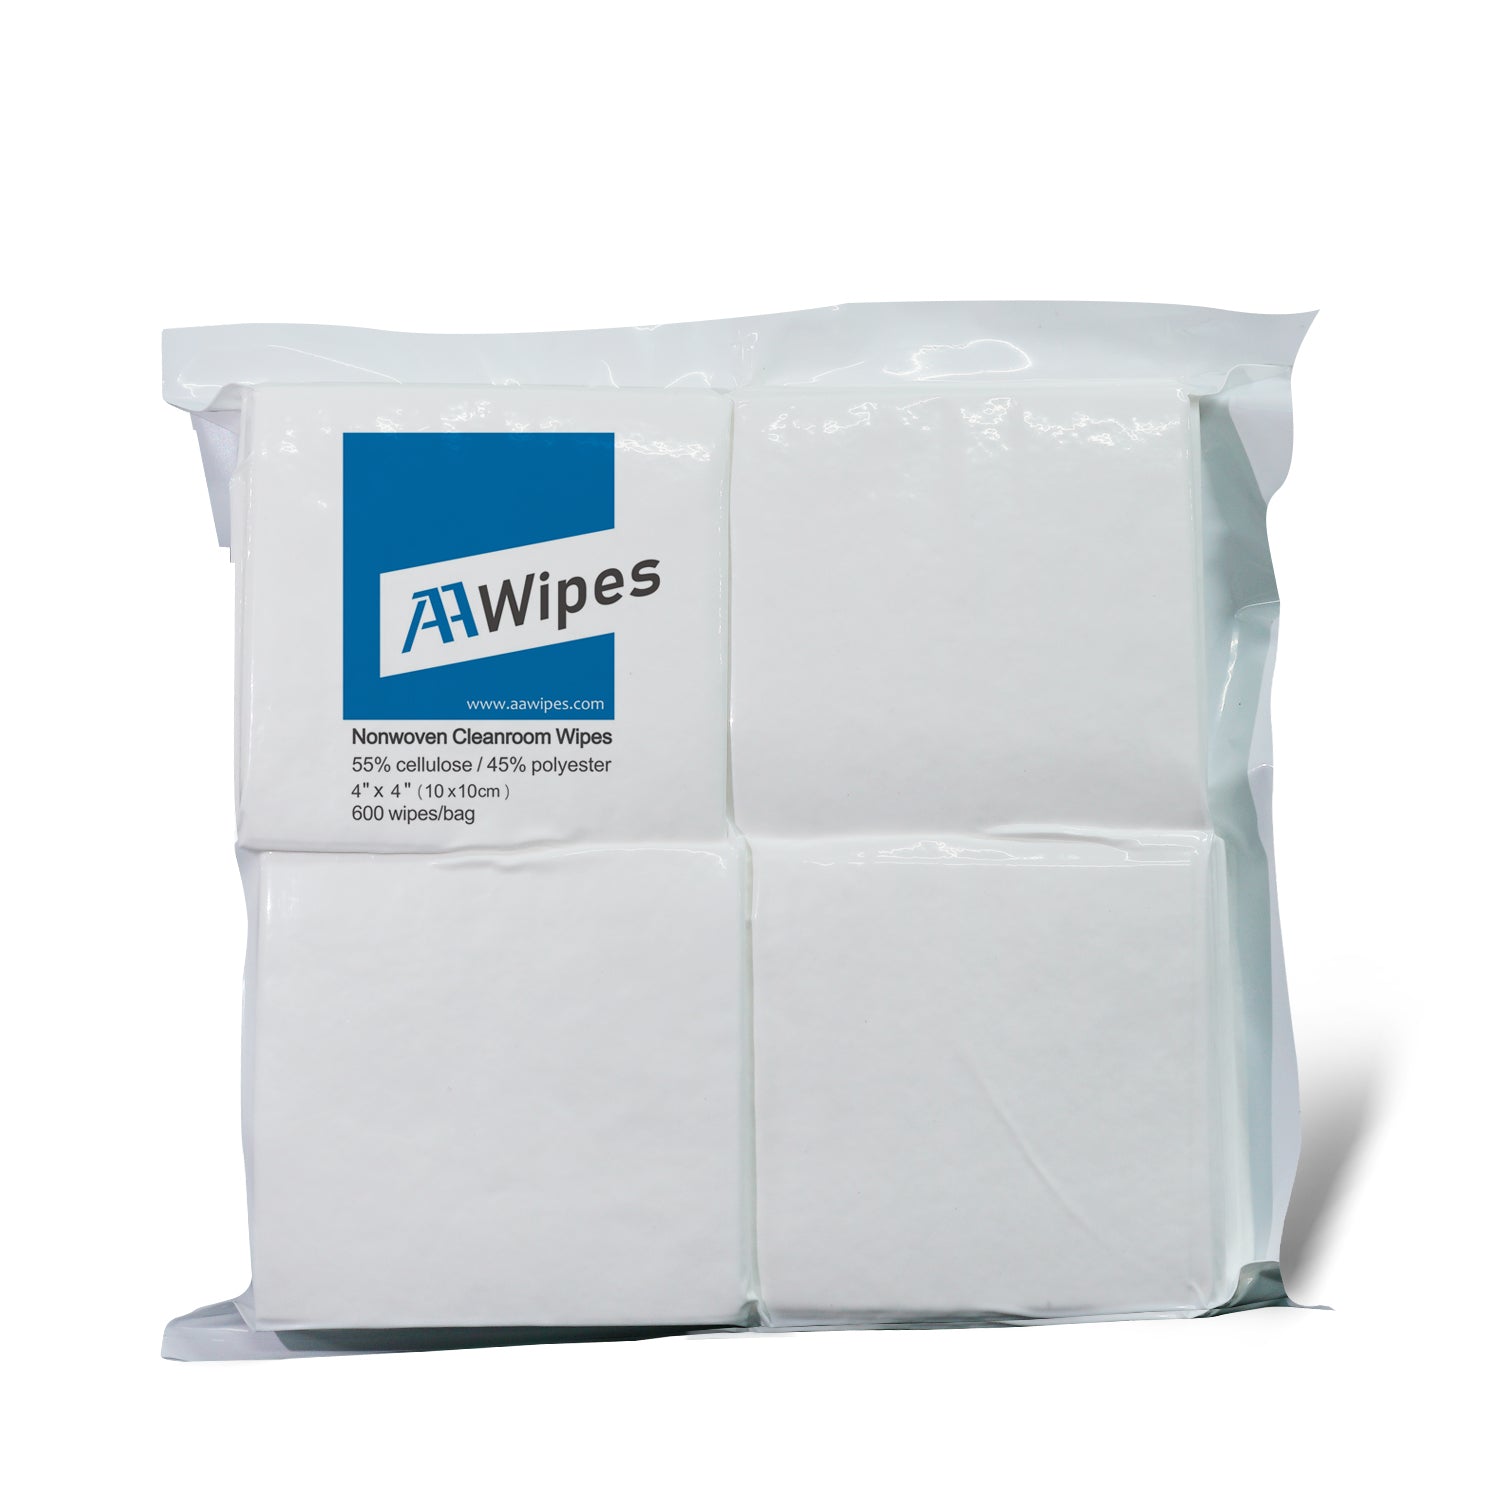 AAwipes Nonwoven Wipes: 4"x4" Cellulose/Polyester. 16,800 wipes/box in 28 bags (No. NW06804).